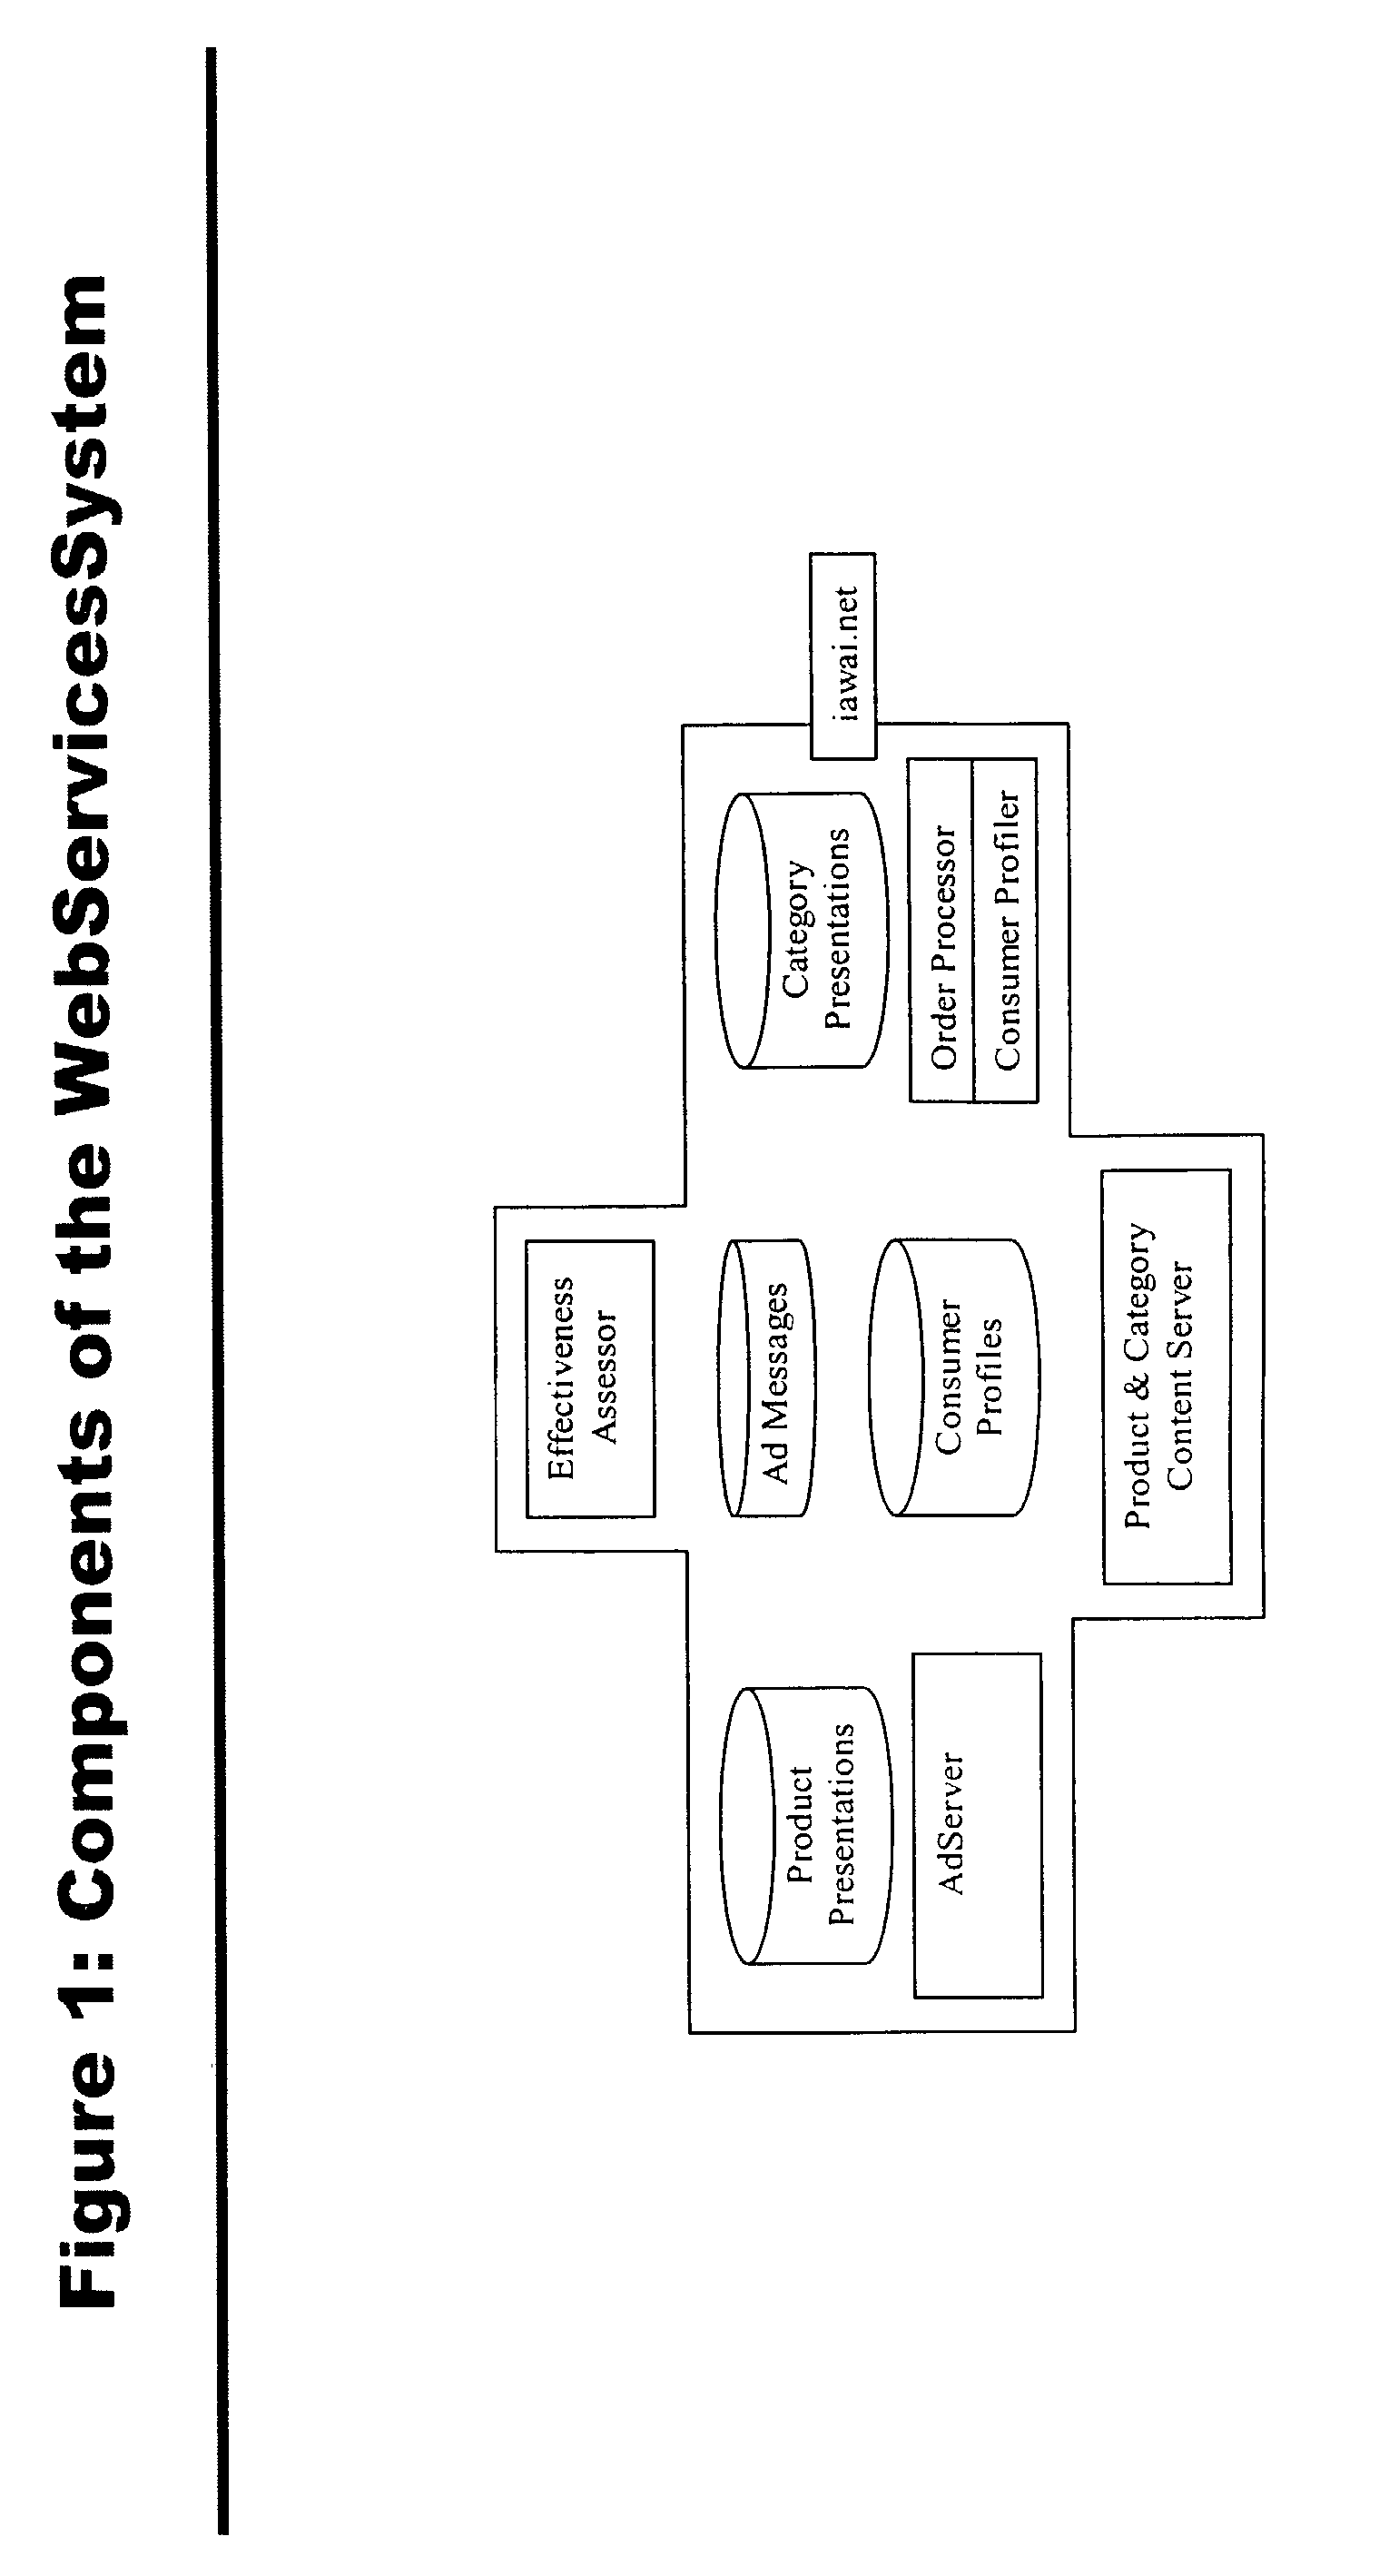 Marketing communication and transaction/distribution services platform for building and managing personalized customer relationships